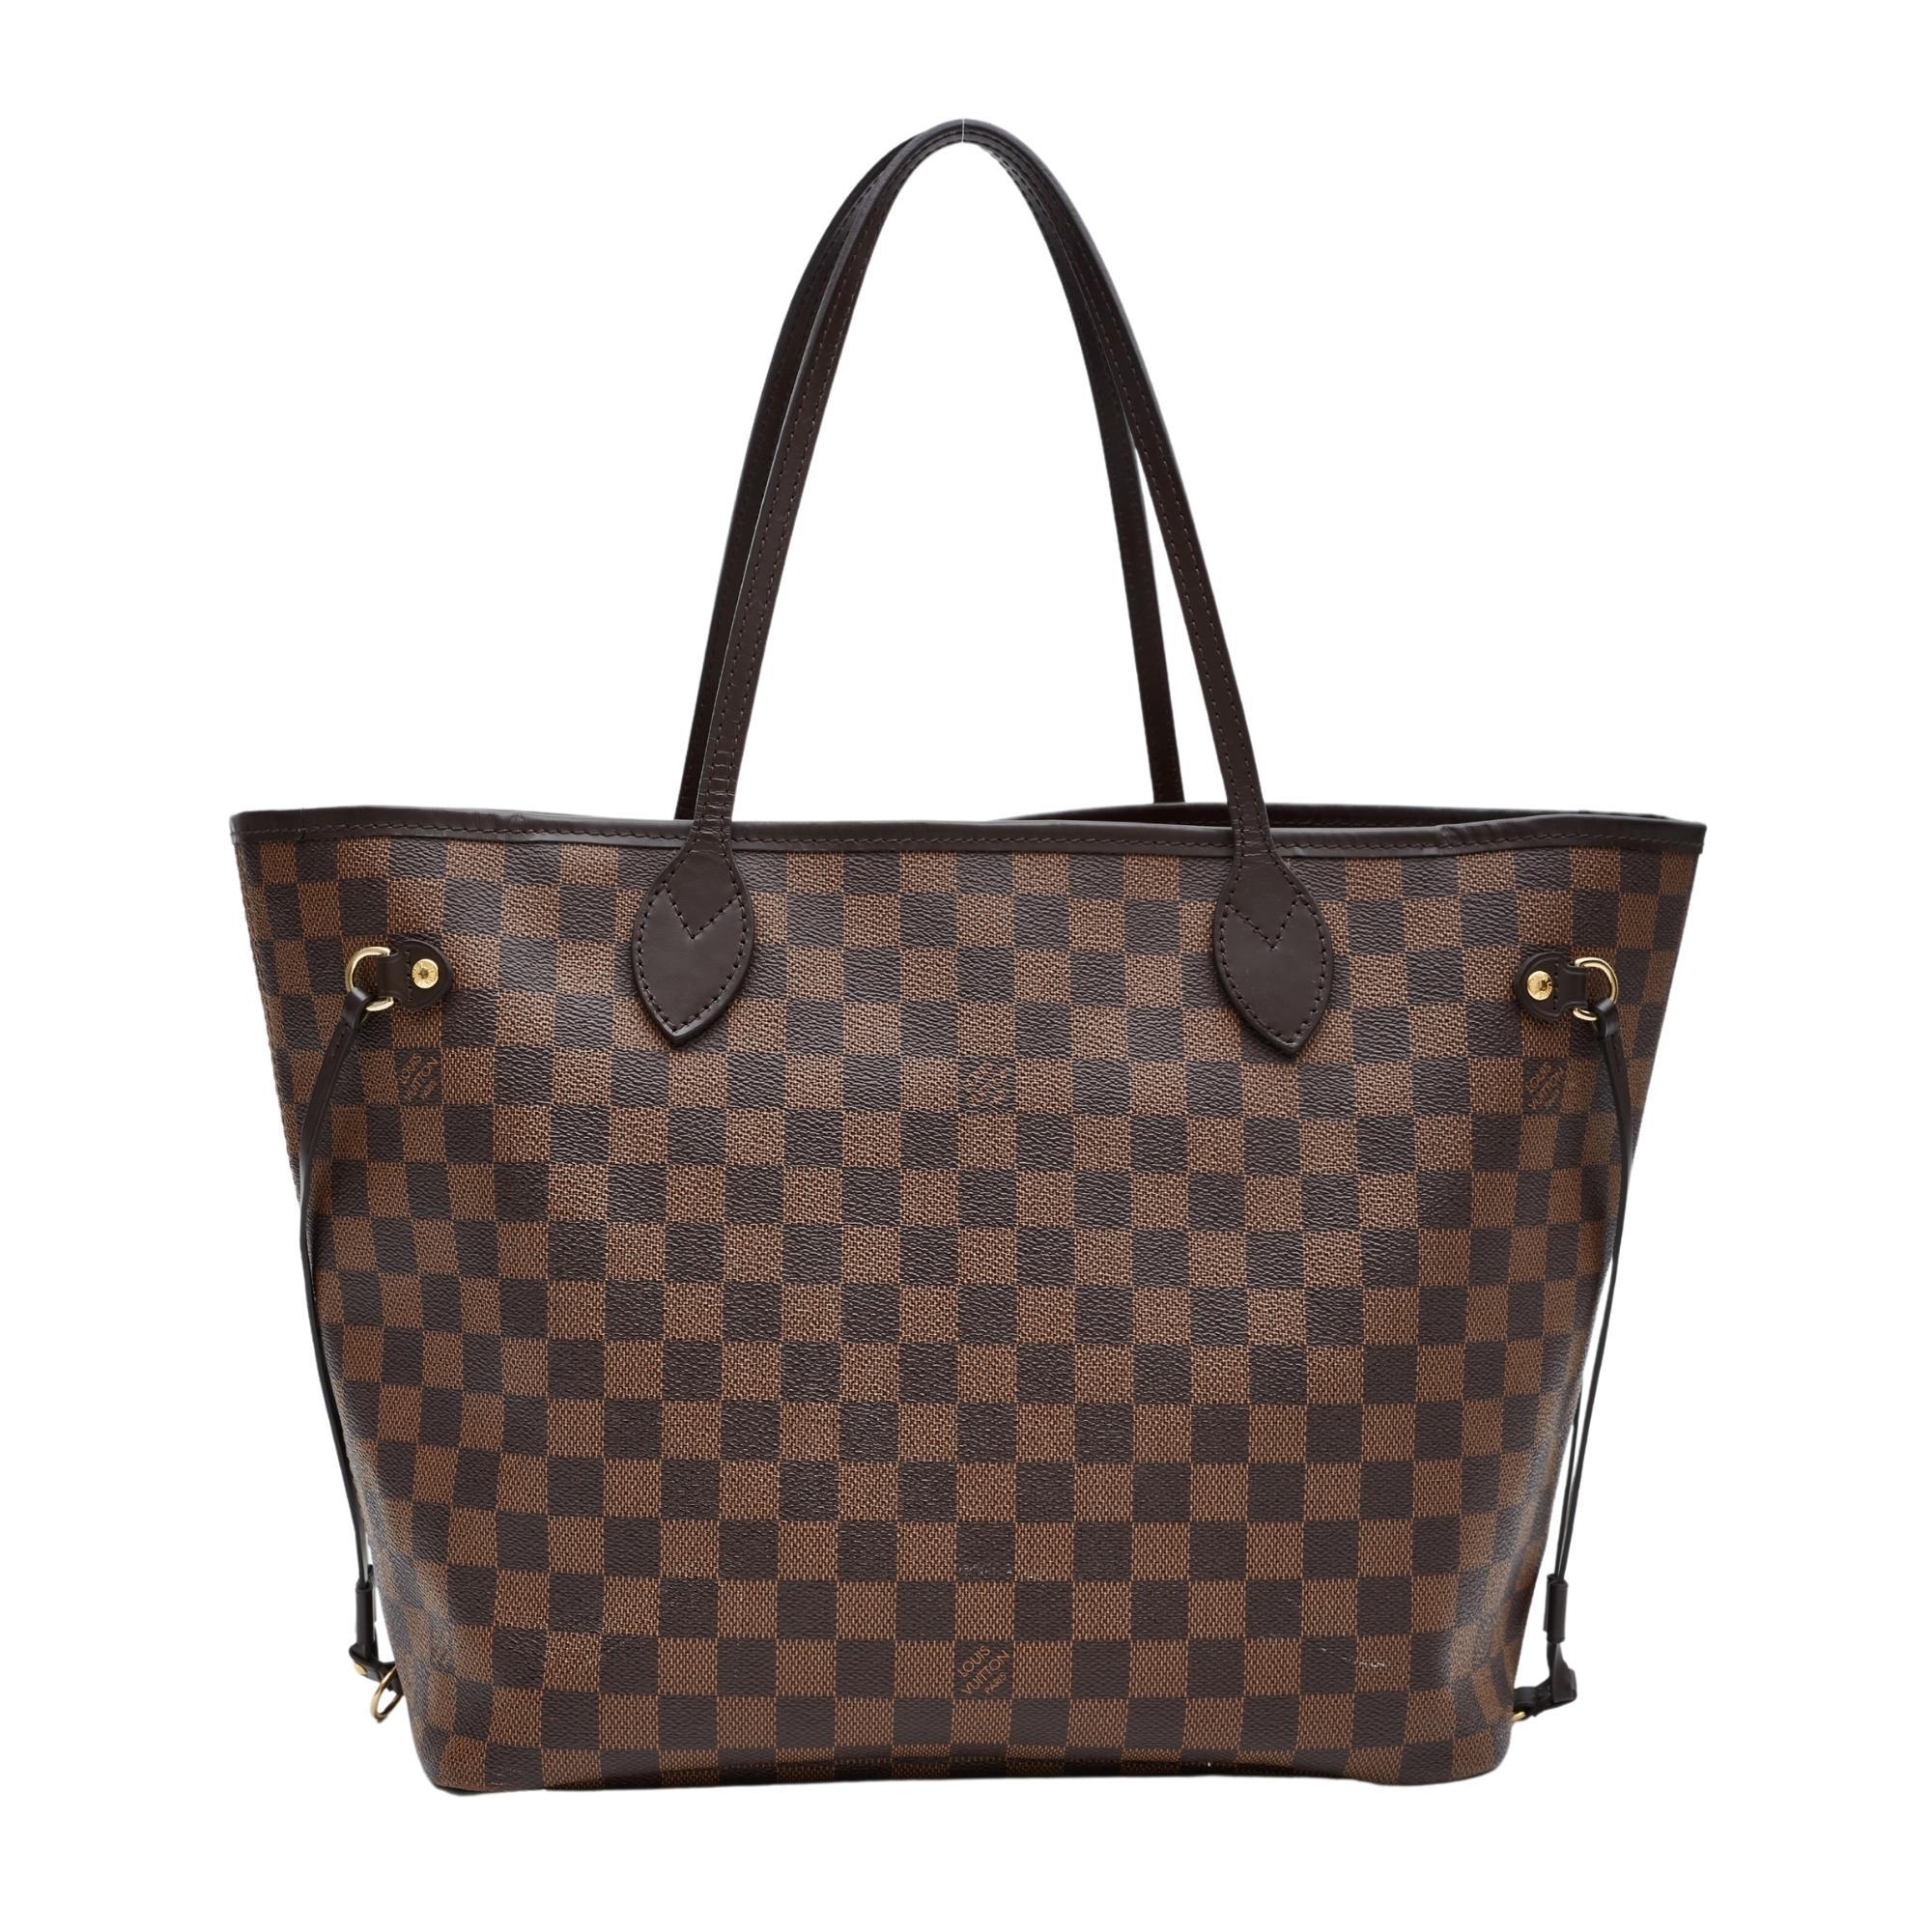 The medium version from Louis Vuitton's classic Neverfull tote collection is made with damier ebene coated canvas with smooth brown leather trim and finishes. The leather on this bag is water and stain resistant. The bag is finished with gold-tone